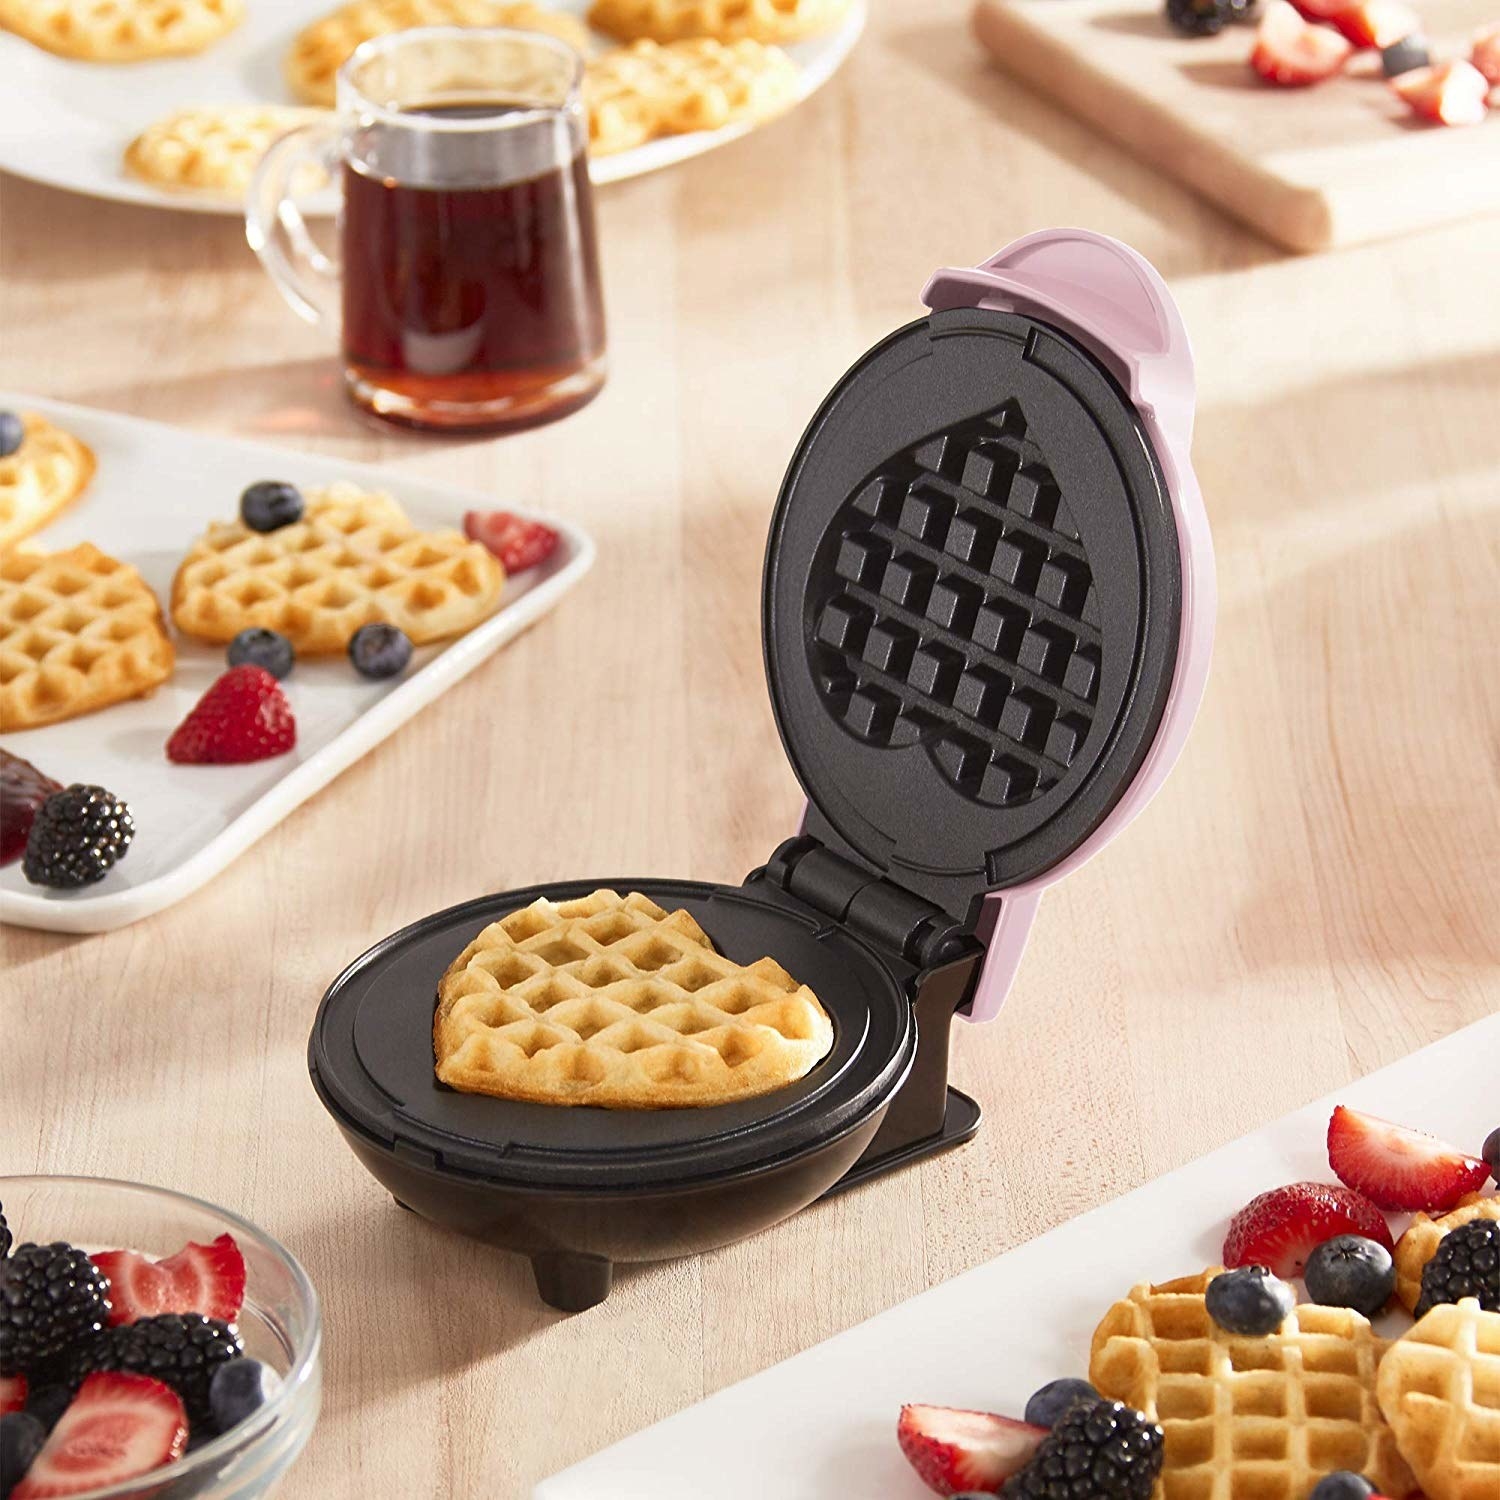 the heart shaped waffle maker with a waffle in it